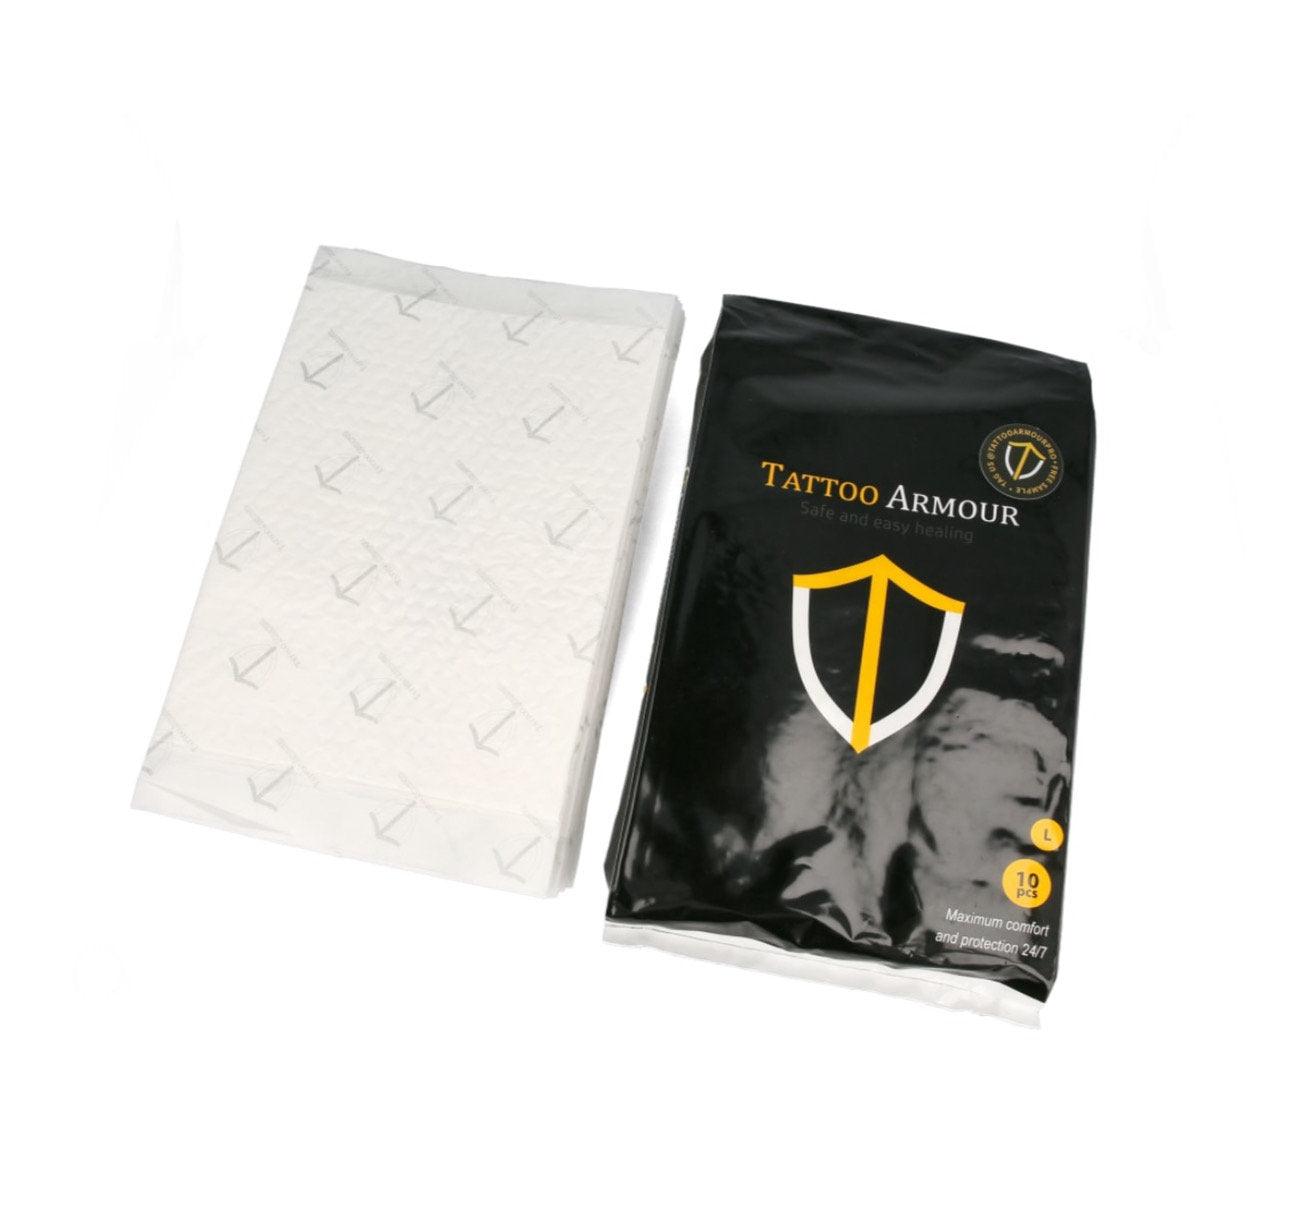 Tattoo Armour Aftercare Pads - Tattoo Everything Supplies